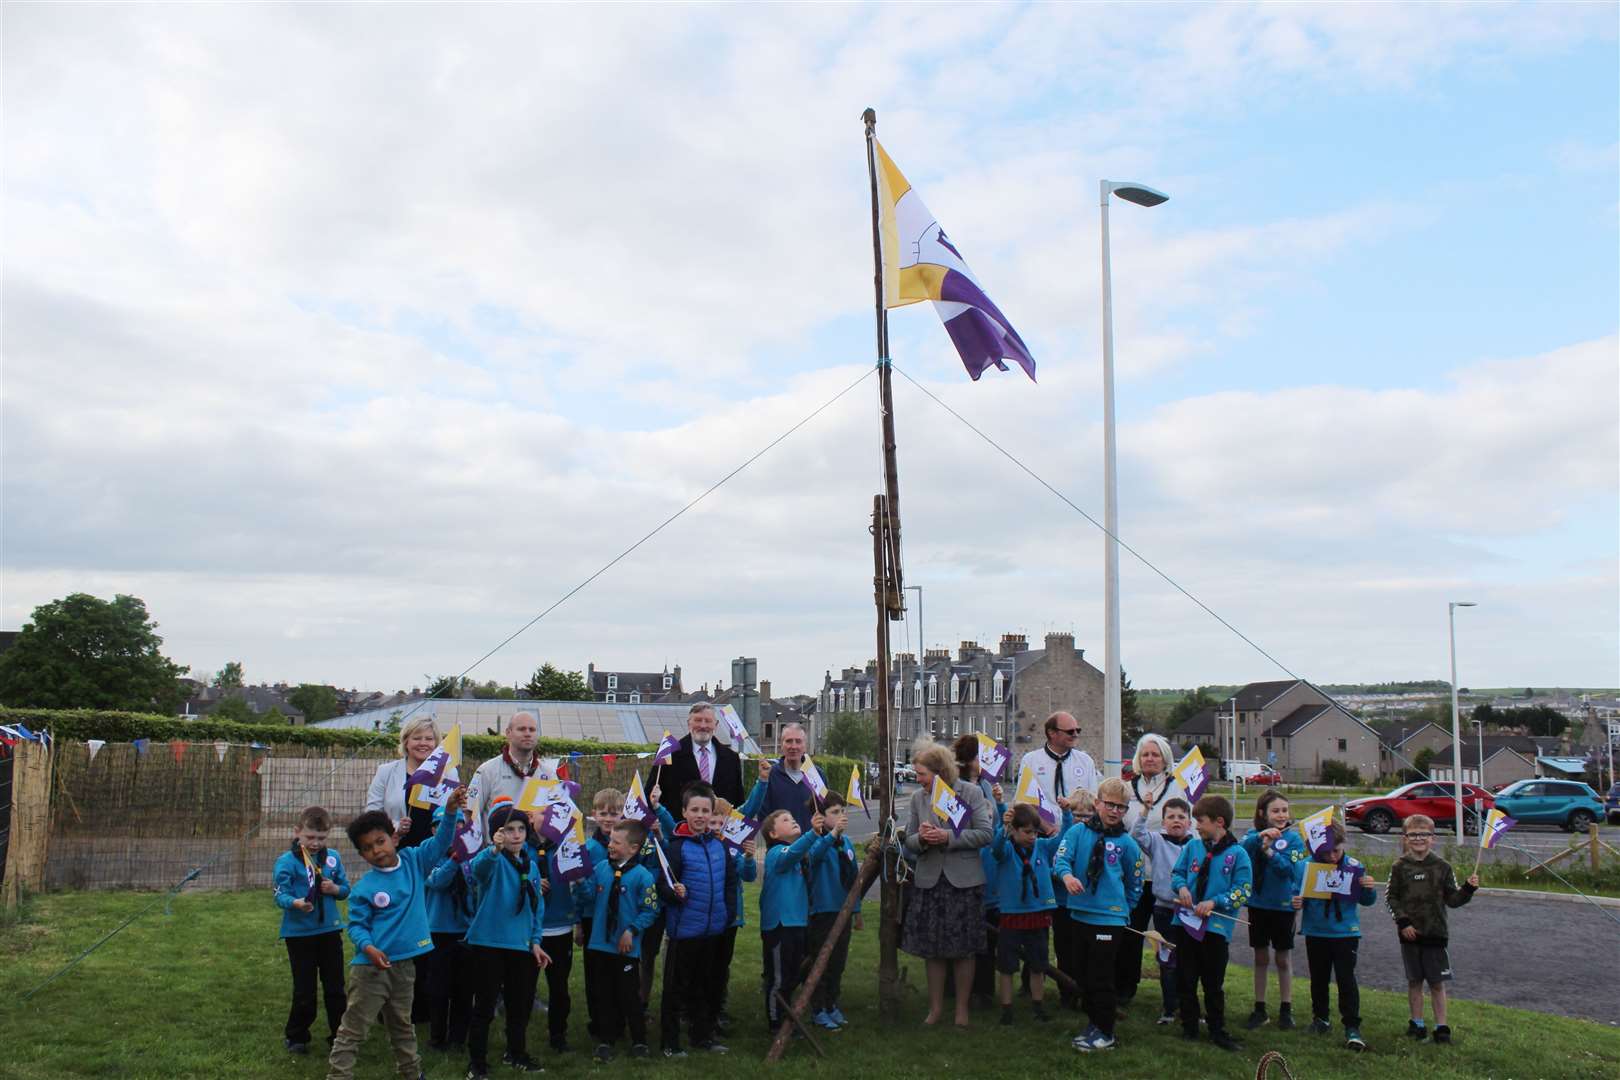 Inverurie Beavers with invited guests depute Lord Lieutenant Clare Thoragood and Aberdeenshire provost Judy Whyte at the newAberdeenshire flag-raising ceremony at Inverurie Scout hut, Victoria street this week. Picture: Griselda McGregor